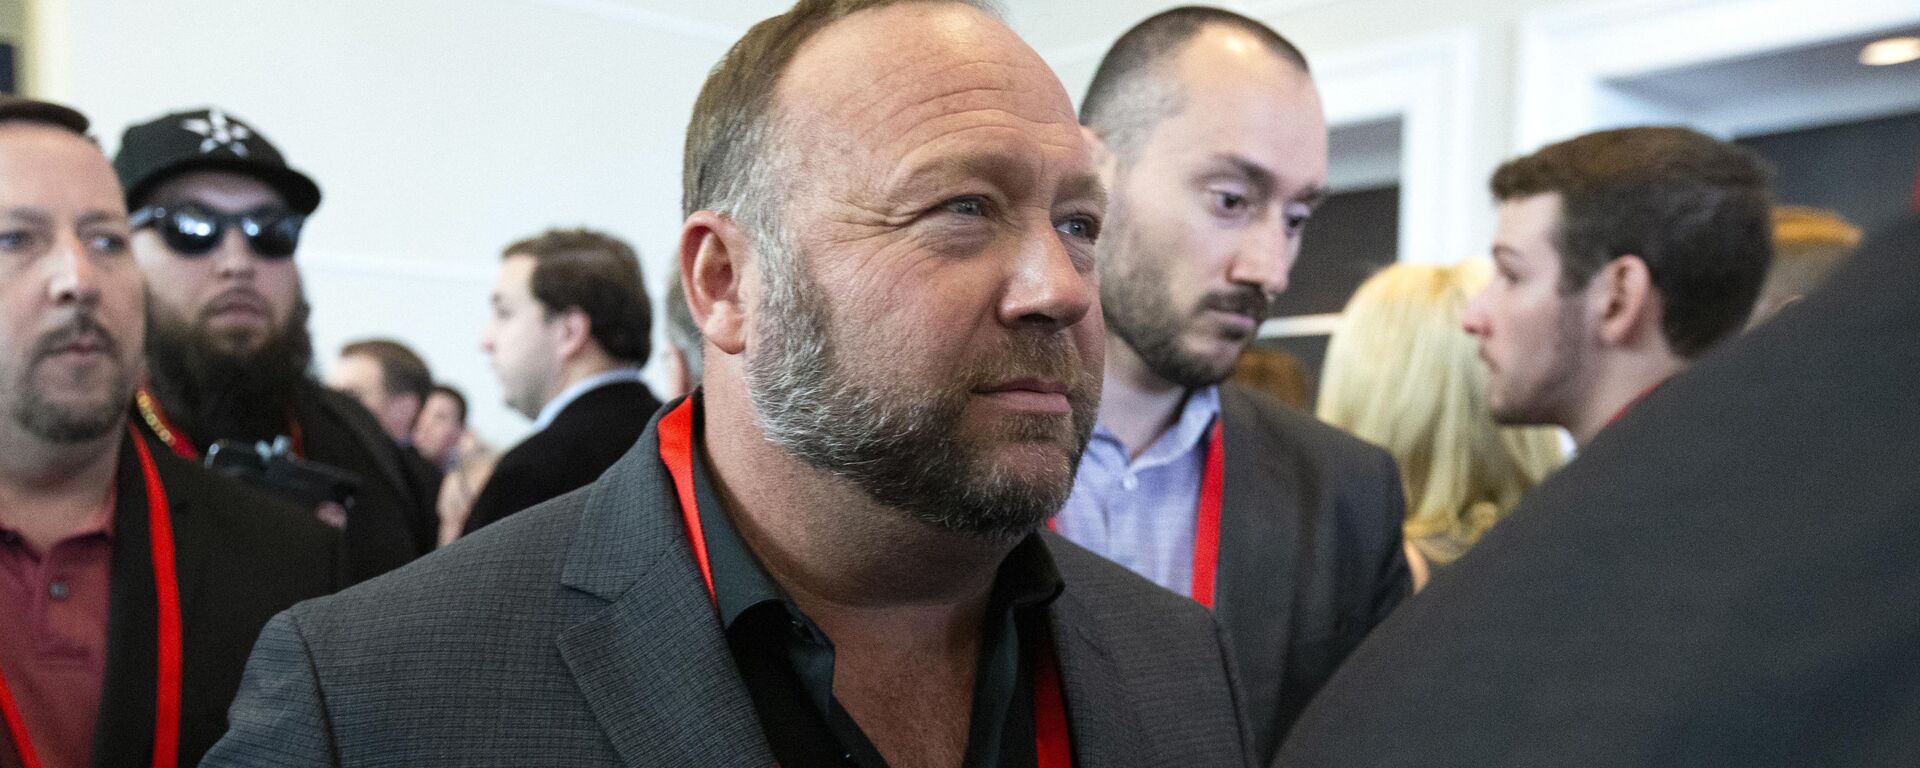 Conspiracy theorist Alex Jones walks at the Conservative Political Action Conference, CPAC 2020, at the National Harbor, in Oxon Hill, Md., Thursday, Feb. 27, 2020 - Sputnik International, 1920, 15.11.2021